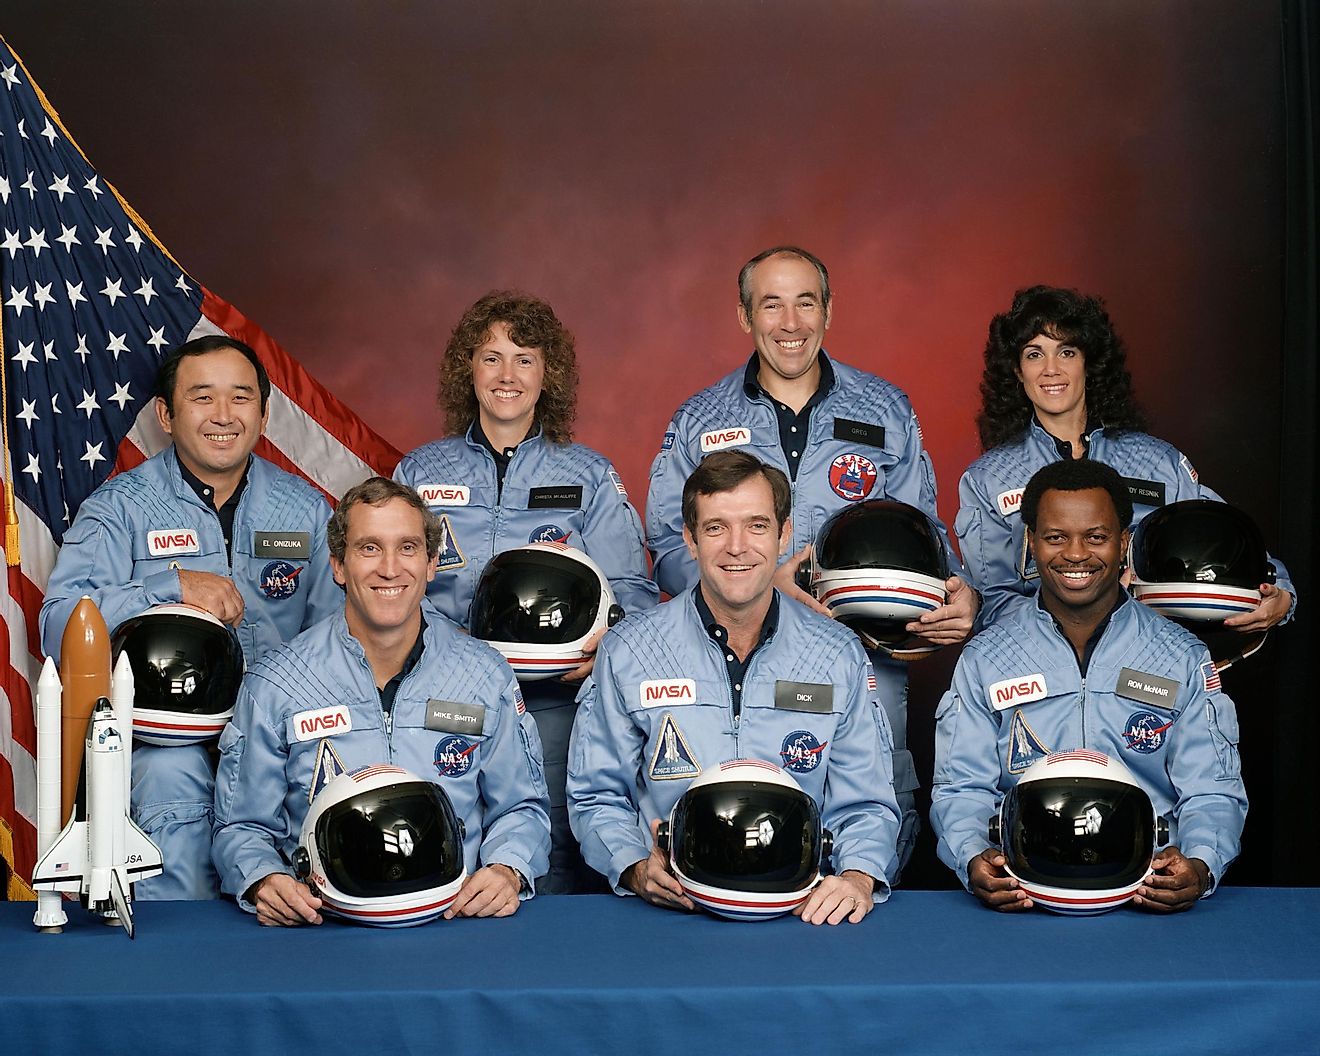 The Space Shuttle Challenger disaster was an incident in the United States space program that ended fatally.